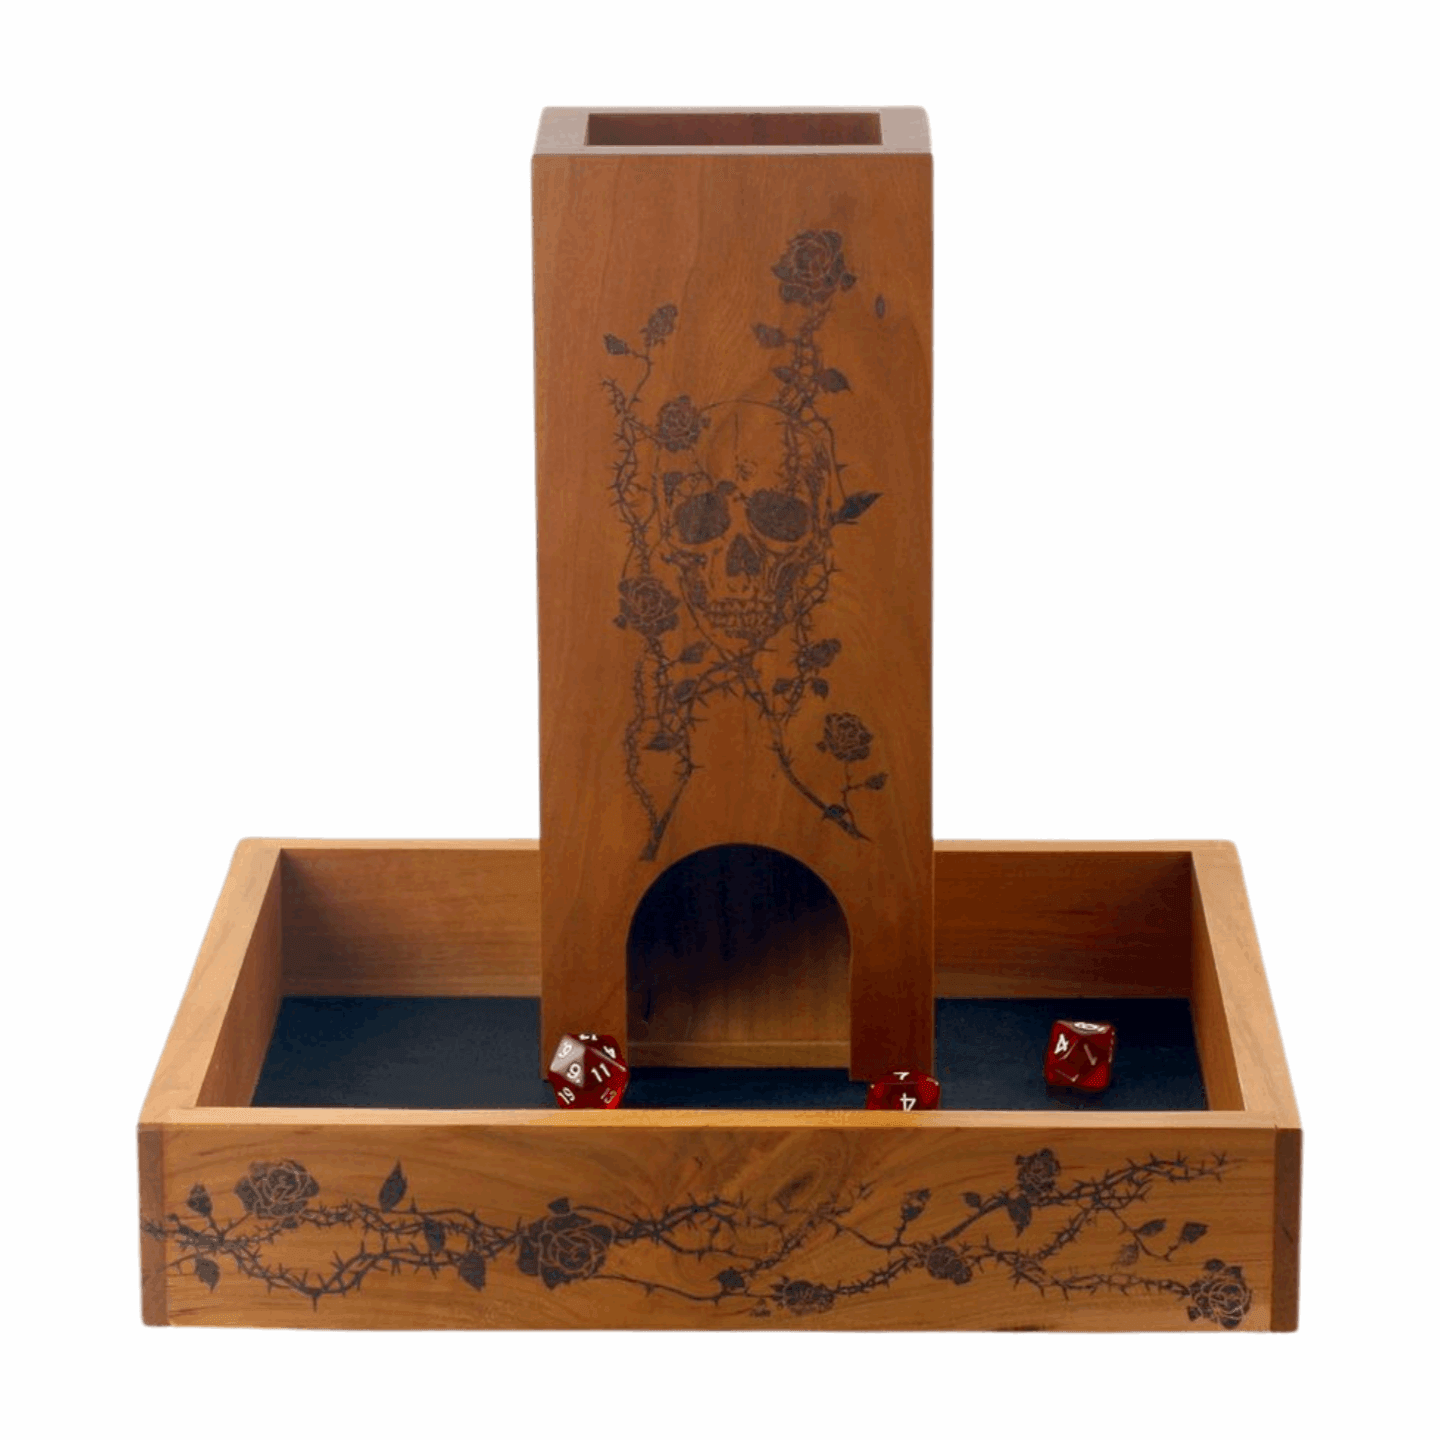 Large Cherry Wood Dice Tray with Rose and Thorn Design for Tabletop Gaming - Dragon Armor Games